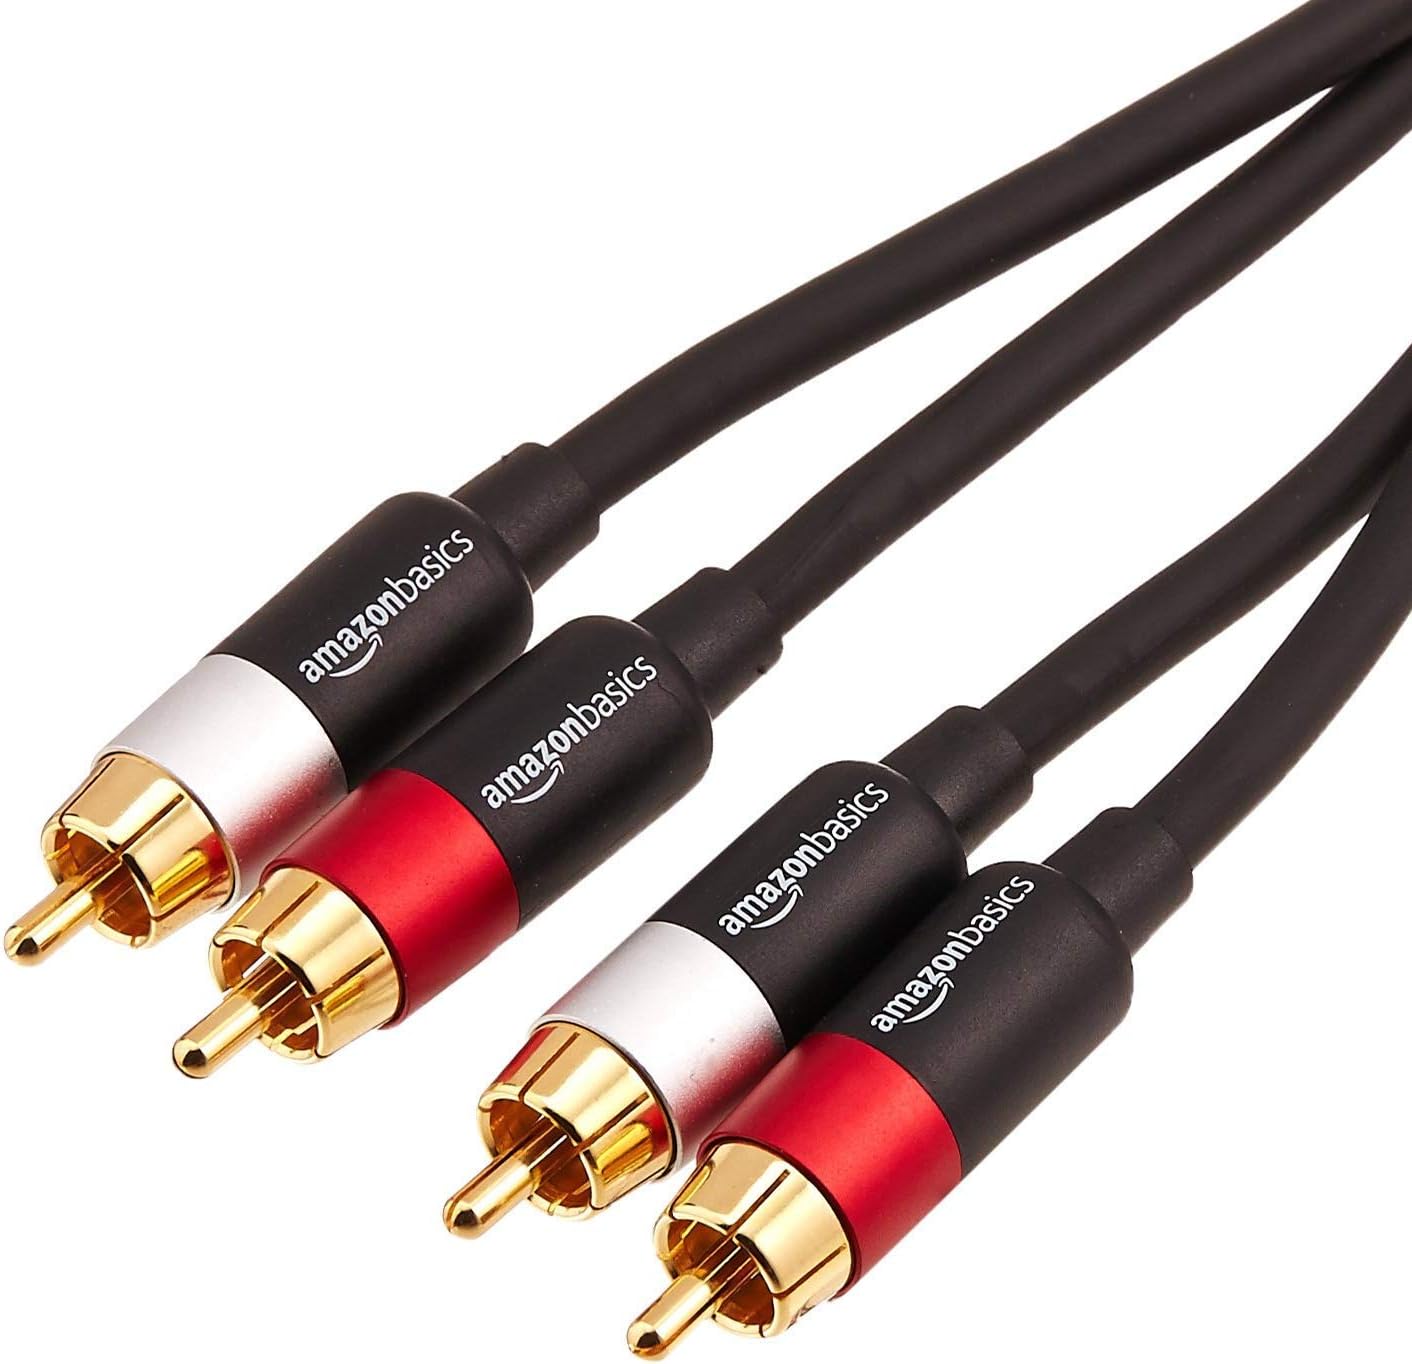 rca cable s for audio detailed review